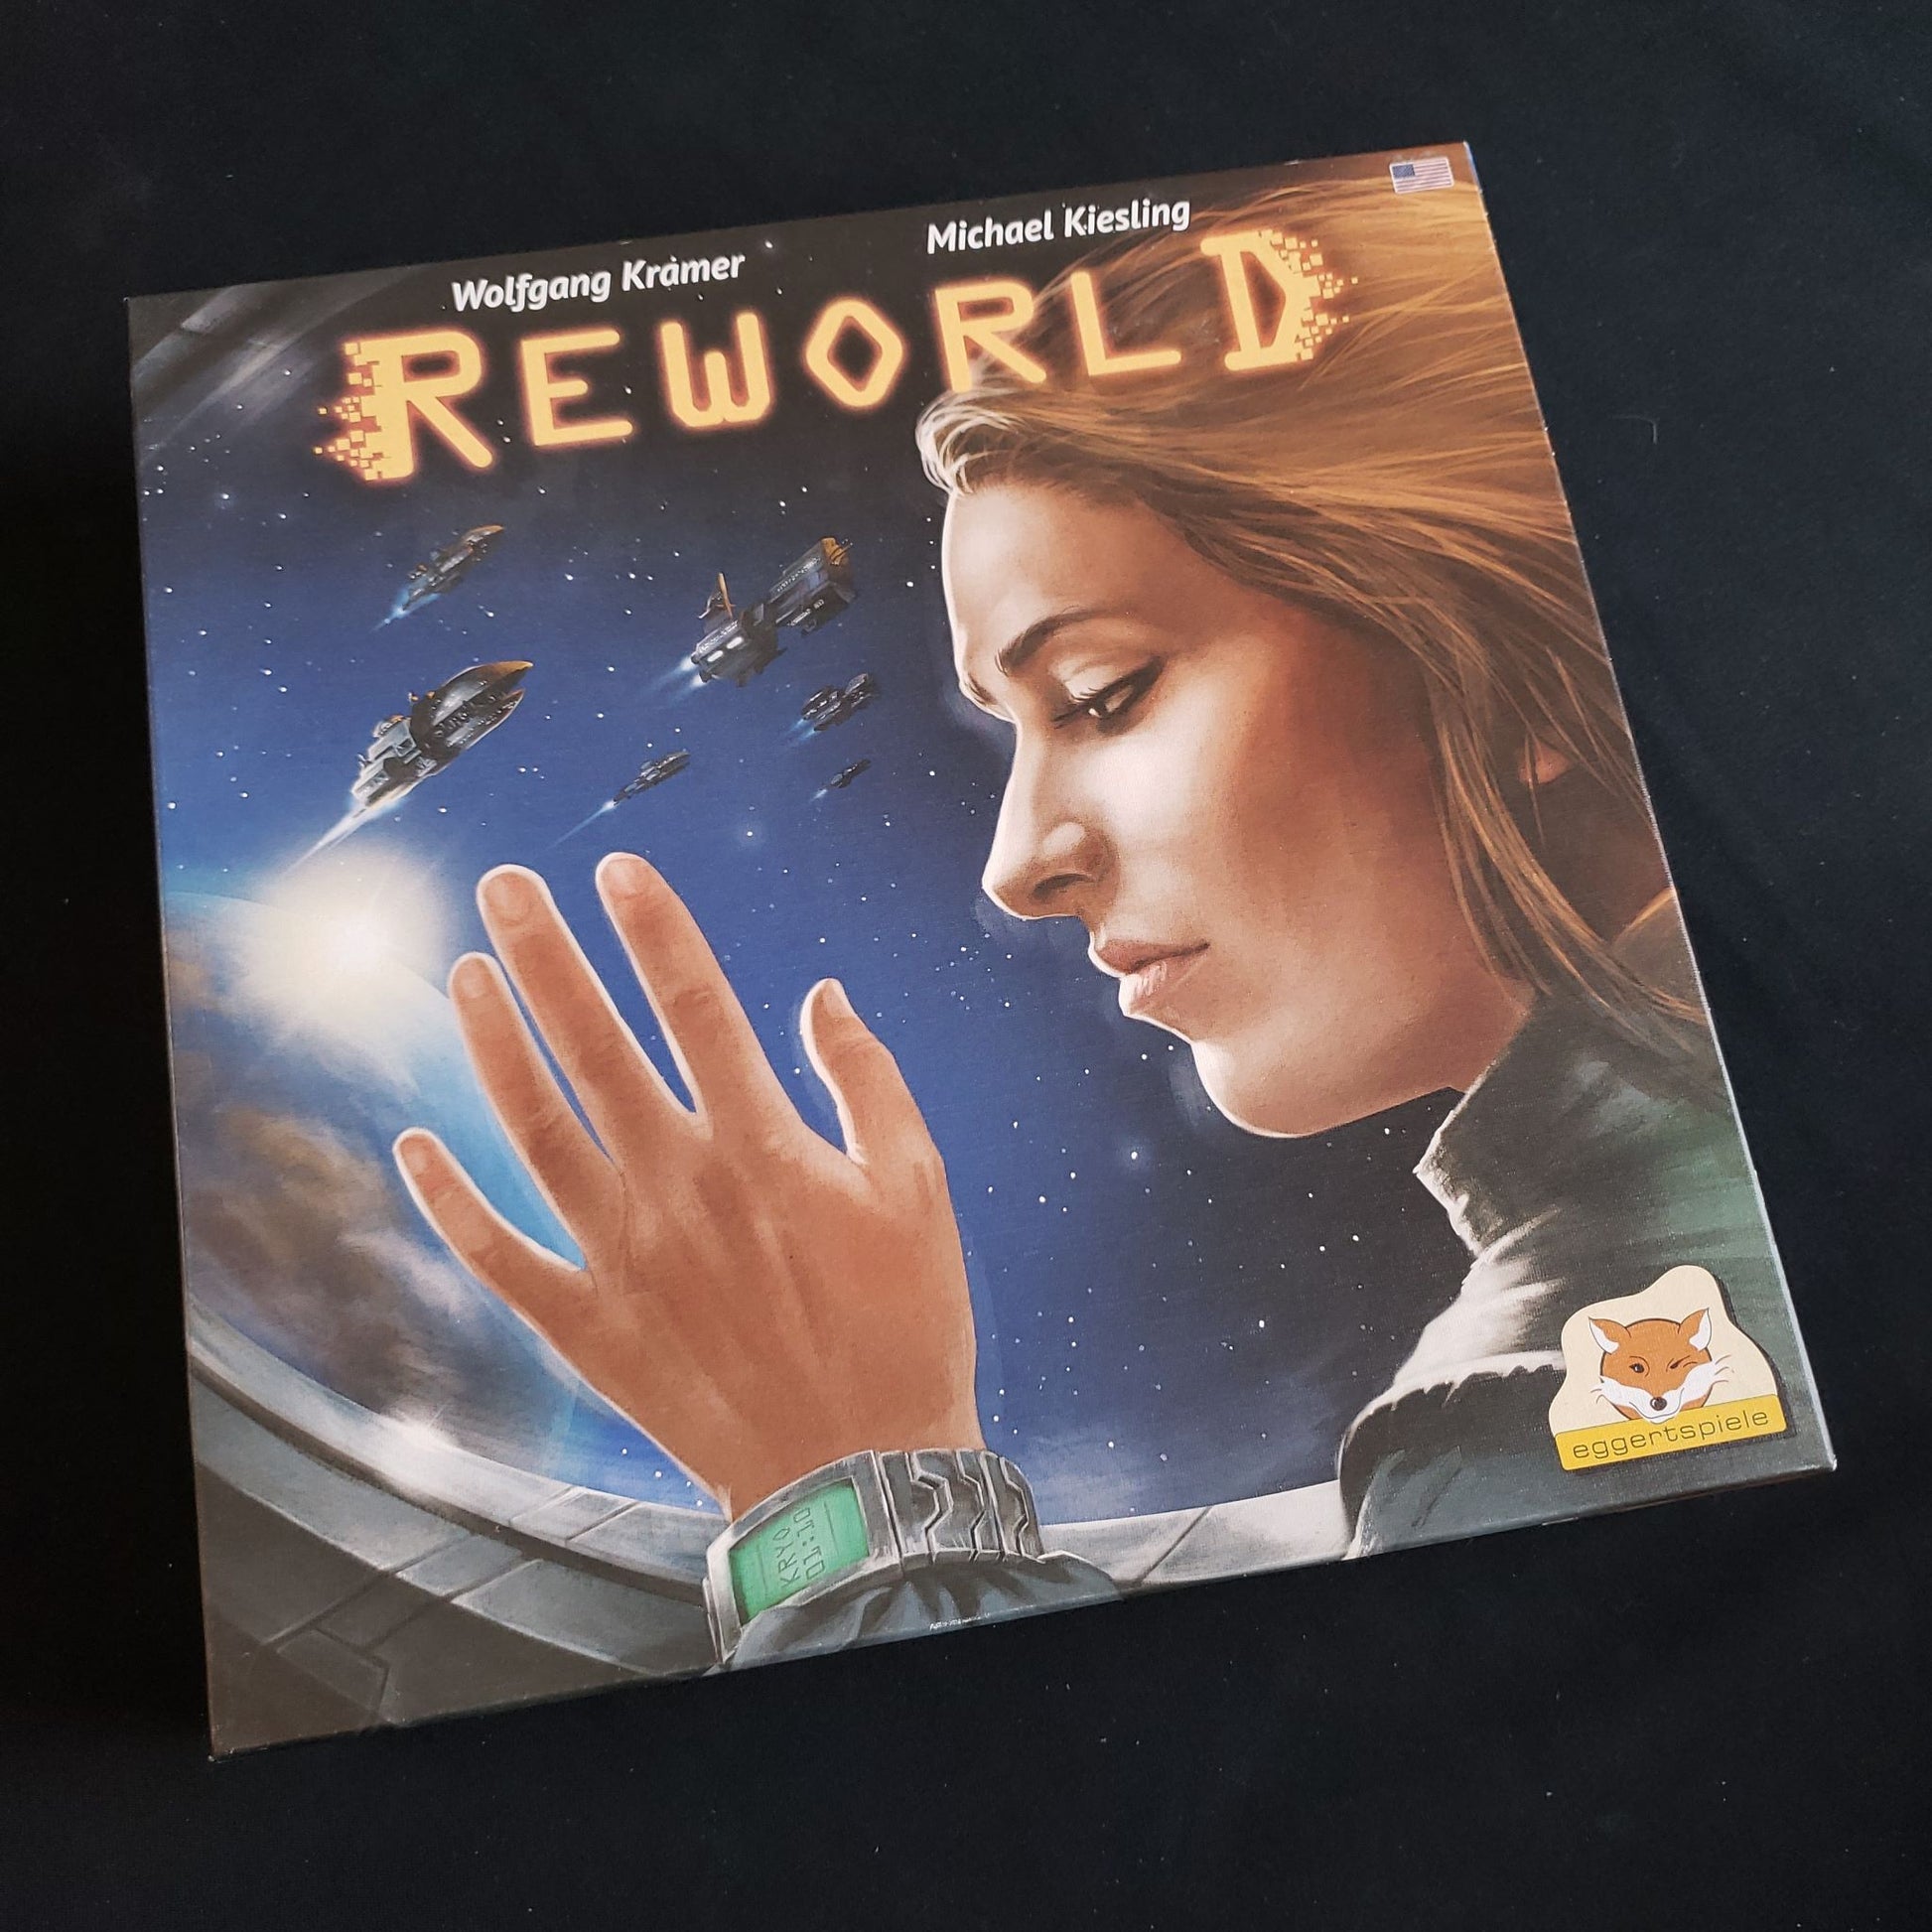 Image shows the front cover of the box of the Reworld board game